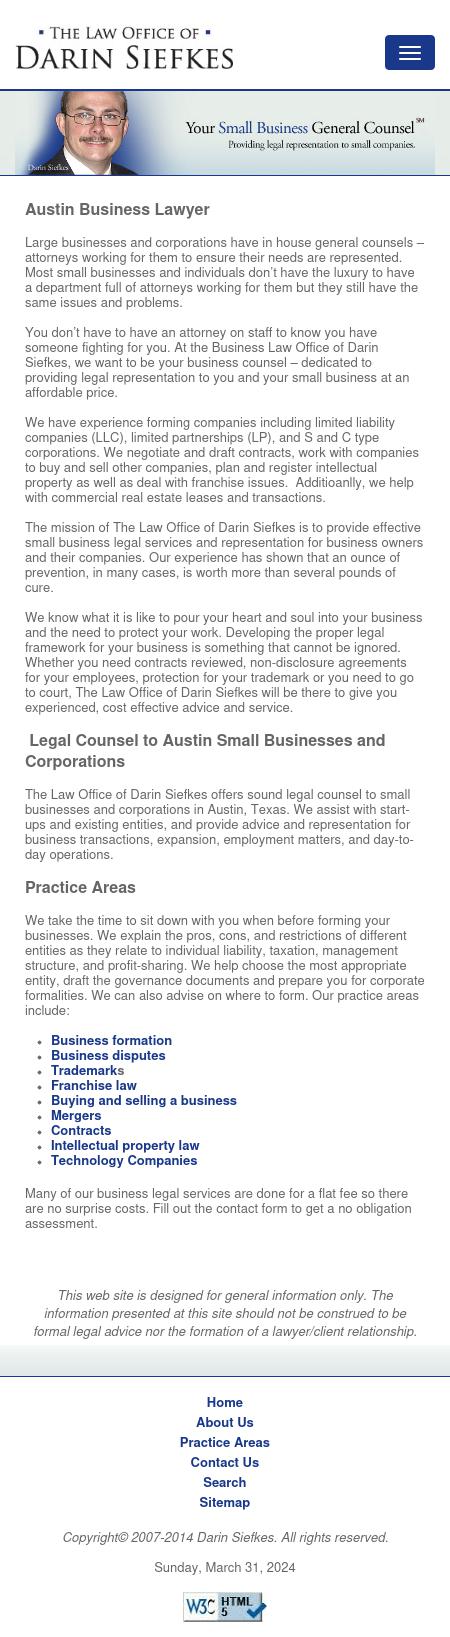 The Law Office of Darin Siefkes, PLLC - Austin TX Lawyers